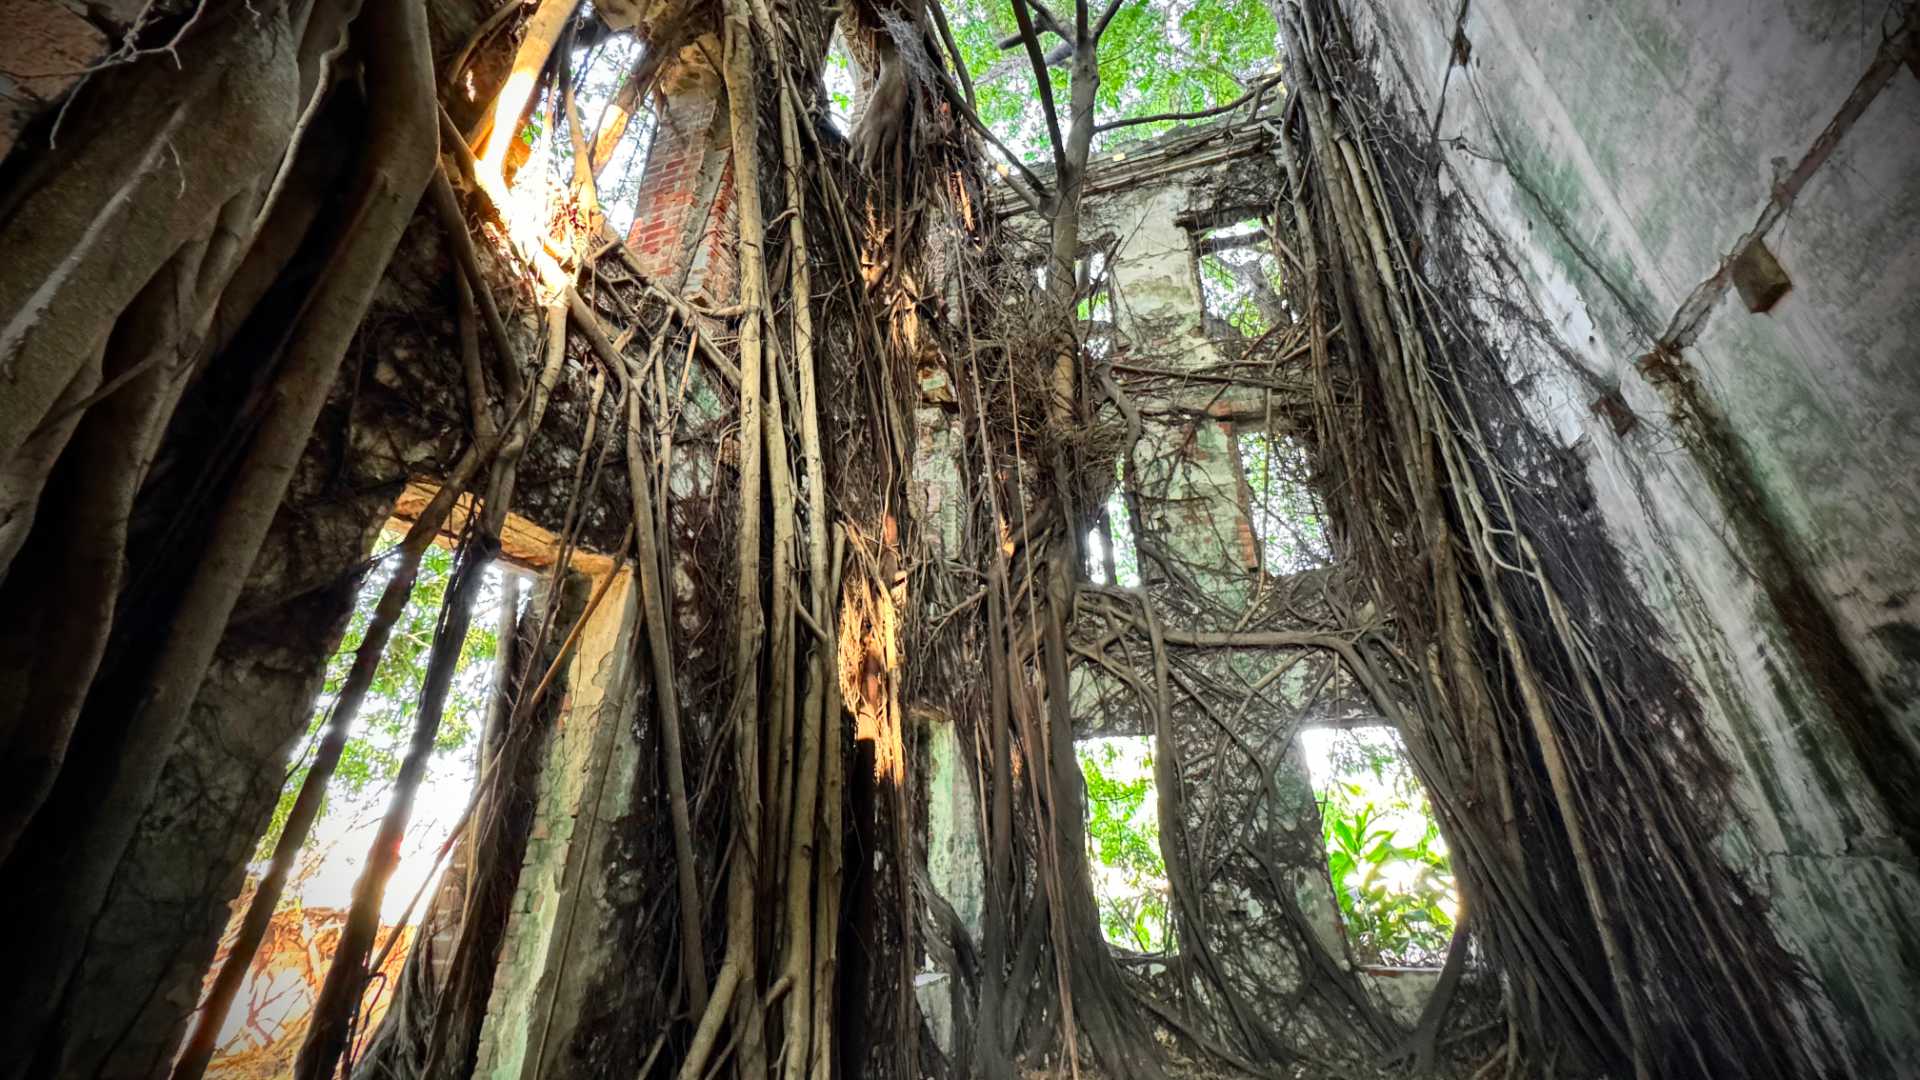 The interior of the Minxiong Haunted House. All of the internal floors and walls, and doors and windows, are missing. It is a hollow shell filled with vines and tree roots.